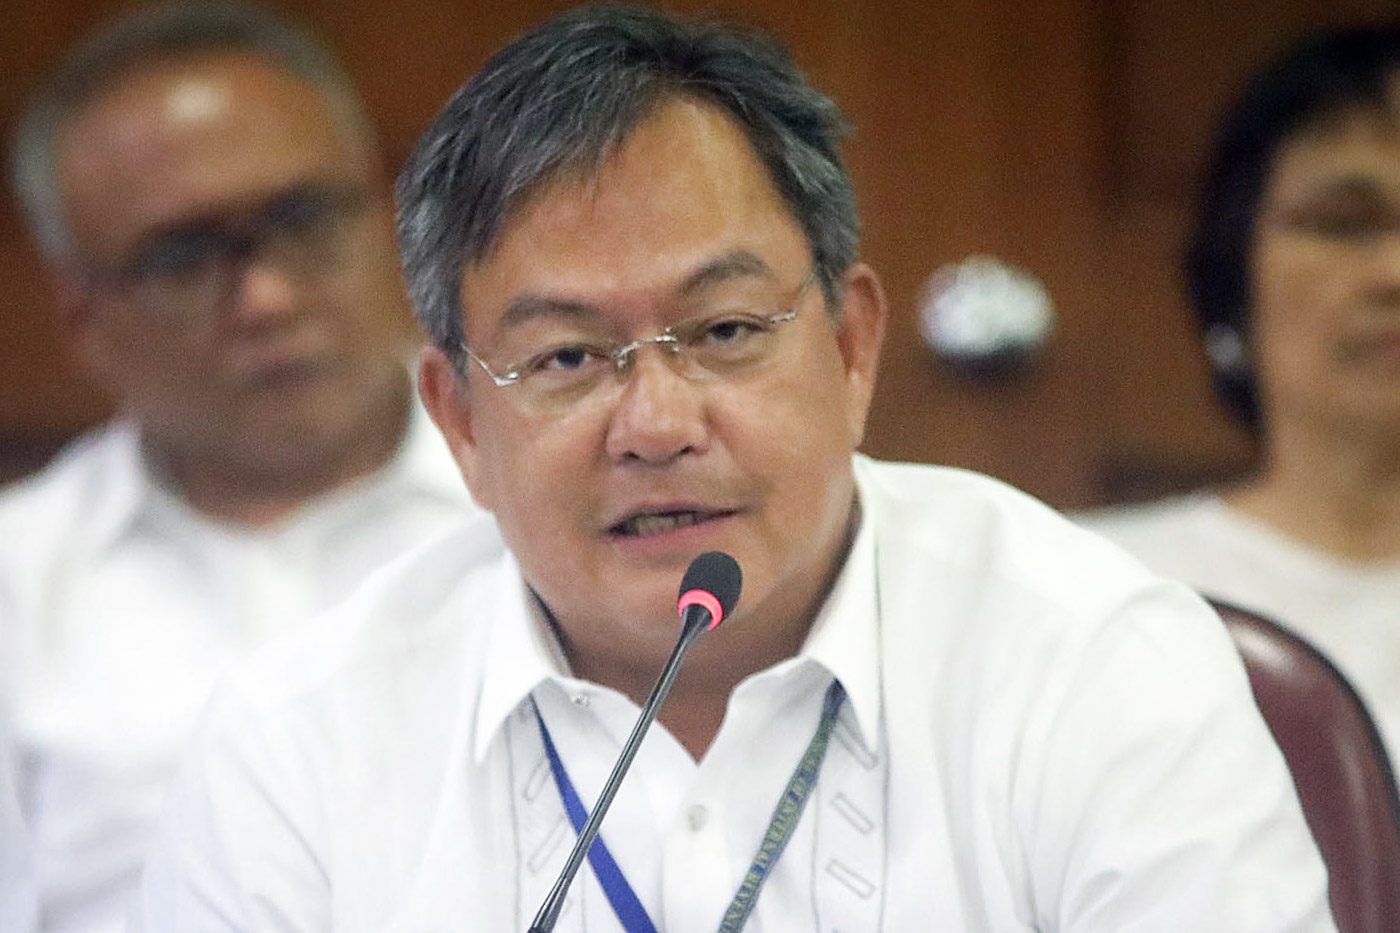 BIR. Resource person Atty Arnel Guballa, Deputy Commissioner for Operations of BIR, testifies before the House Committee on Justice on February 19, 2018. File photo by Darren Langit/Rappler  